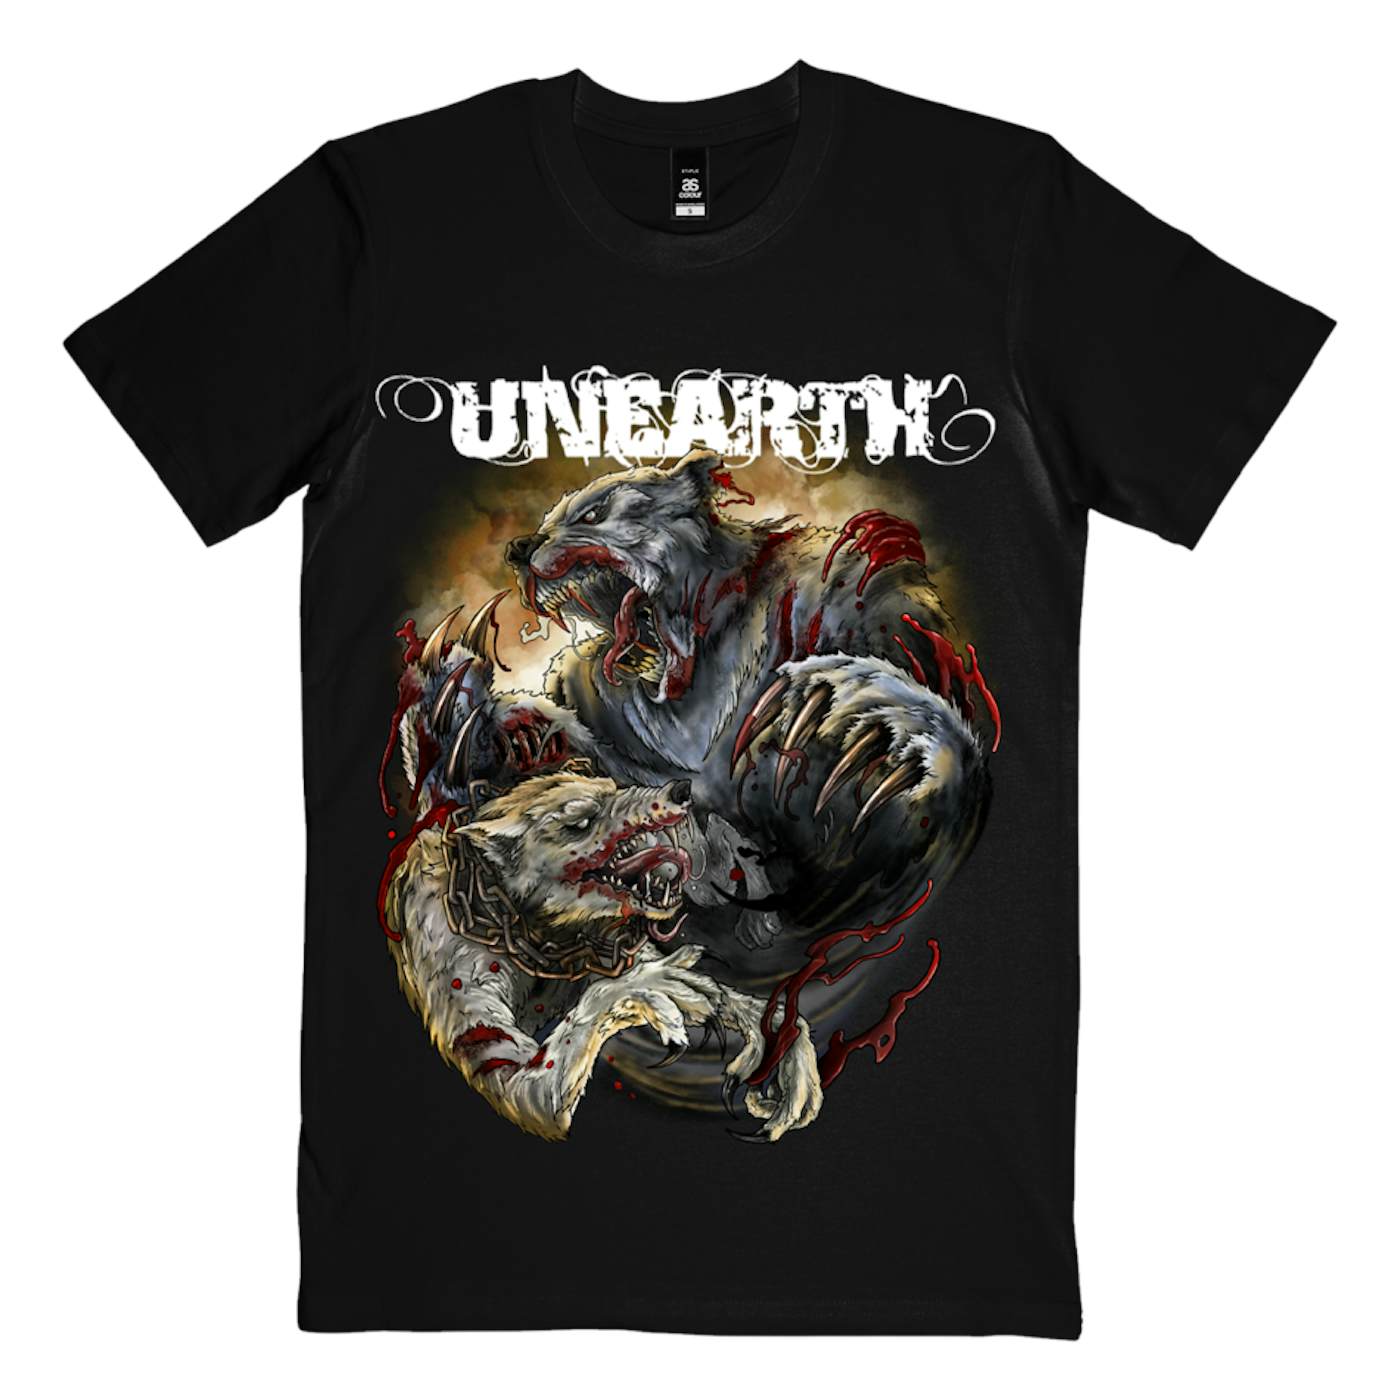 Unearth "My Will Be Done" T-Shirt (Black)